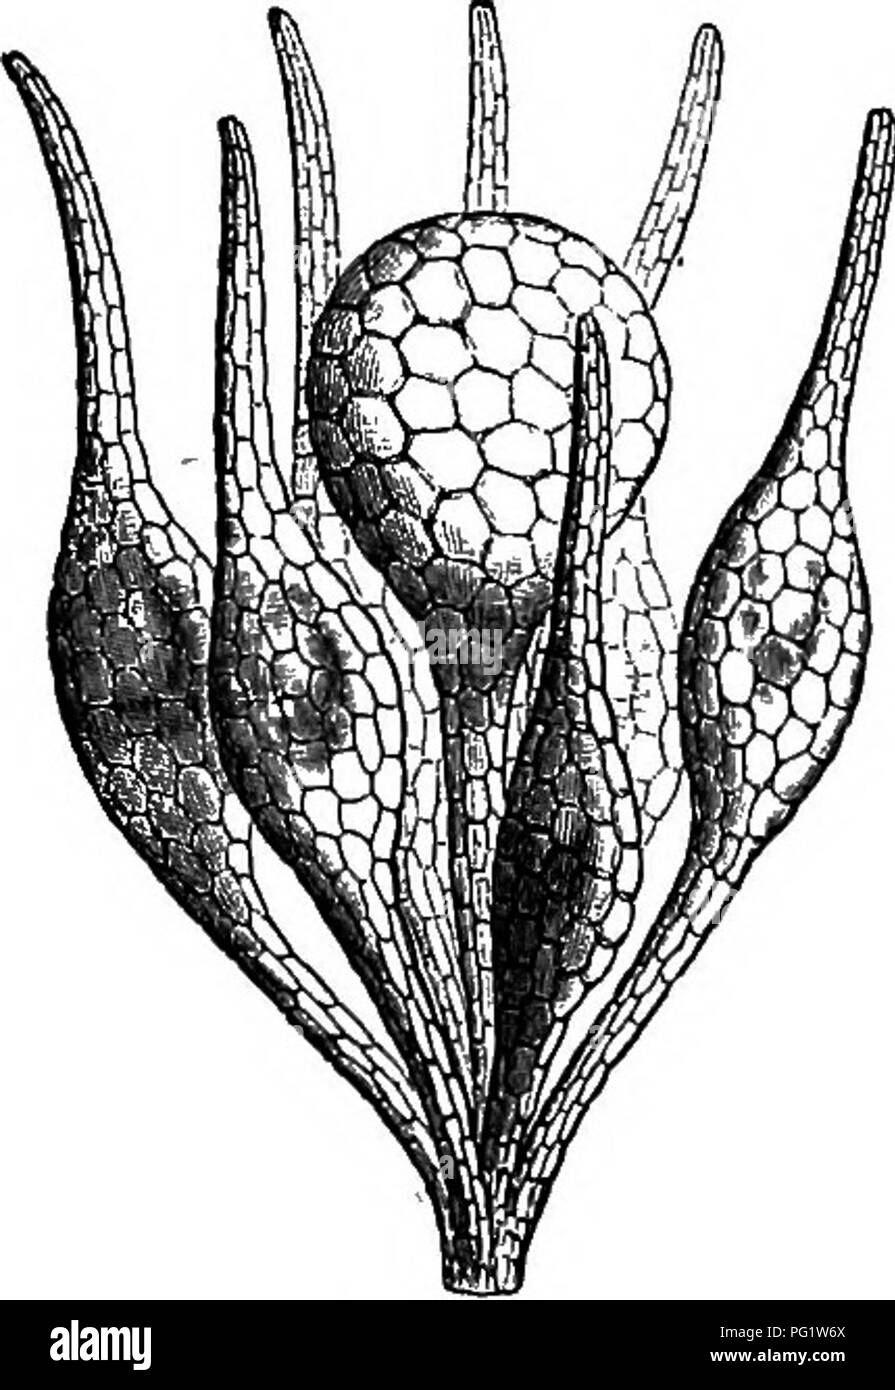 . The natural history of plants. Botany. r&gt;04, NATURAL HISTORY OF PLANTS. Balanophora fungoia. style. In the single cell of the ovary is a parietal and superior pla- centa supporting a descending, afiatropous ovule, reduced to a nucule.' The fruit is drupaceous with a fleshy layer generally very thin, monospermous putamen, and the seed filling the cavity of the latter consists of an abundant oily albumen, in the upper portion of v^hich is lodged a very small embryo.^ Balanophora consists of fungiform fleshy and parasitical plants ^ of very peculiar habit. They have a simple, lobed or ramifi Stock Photo